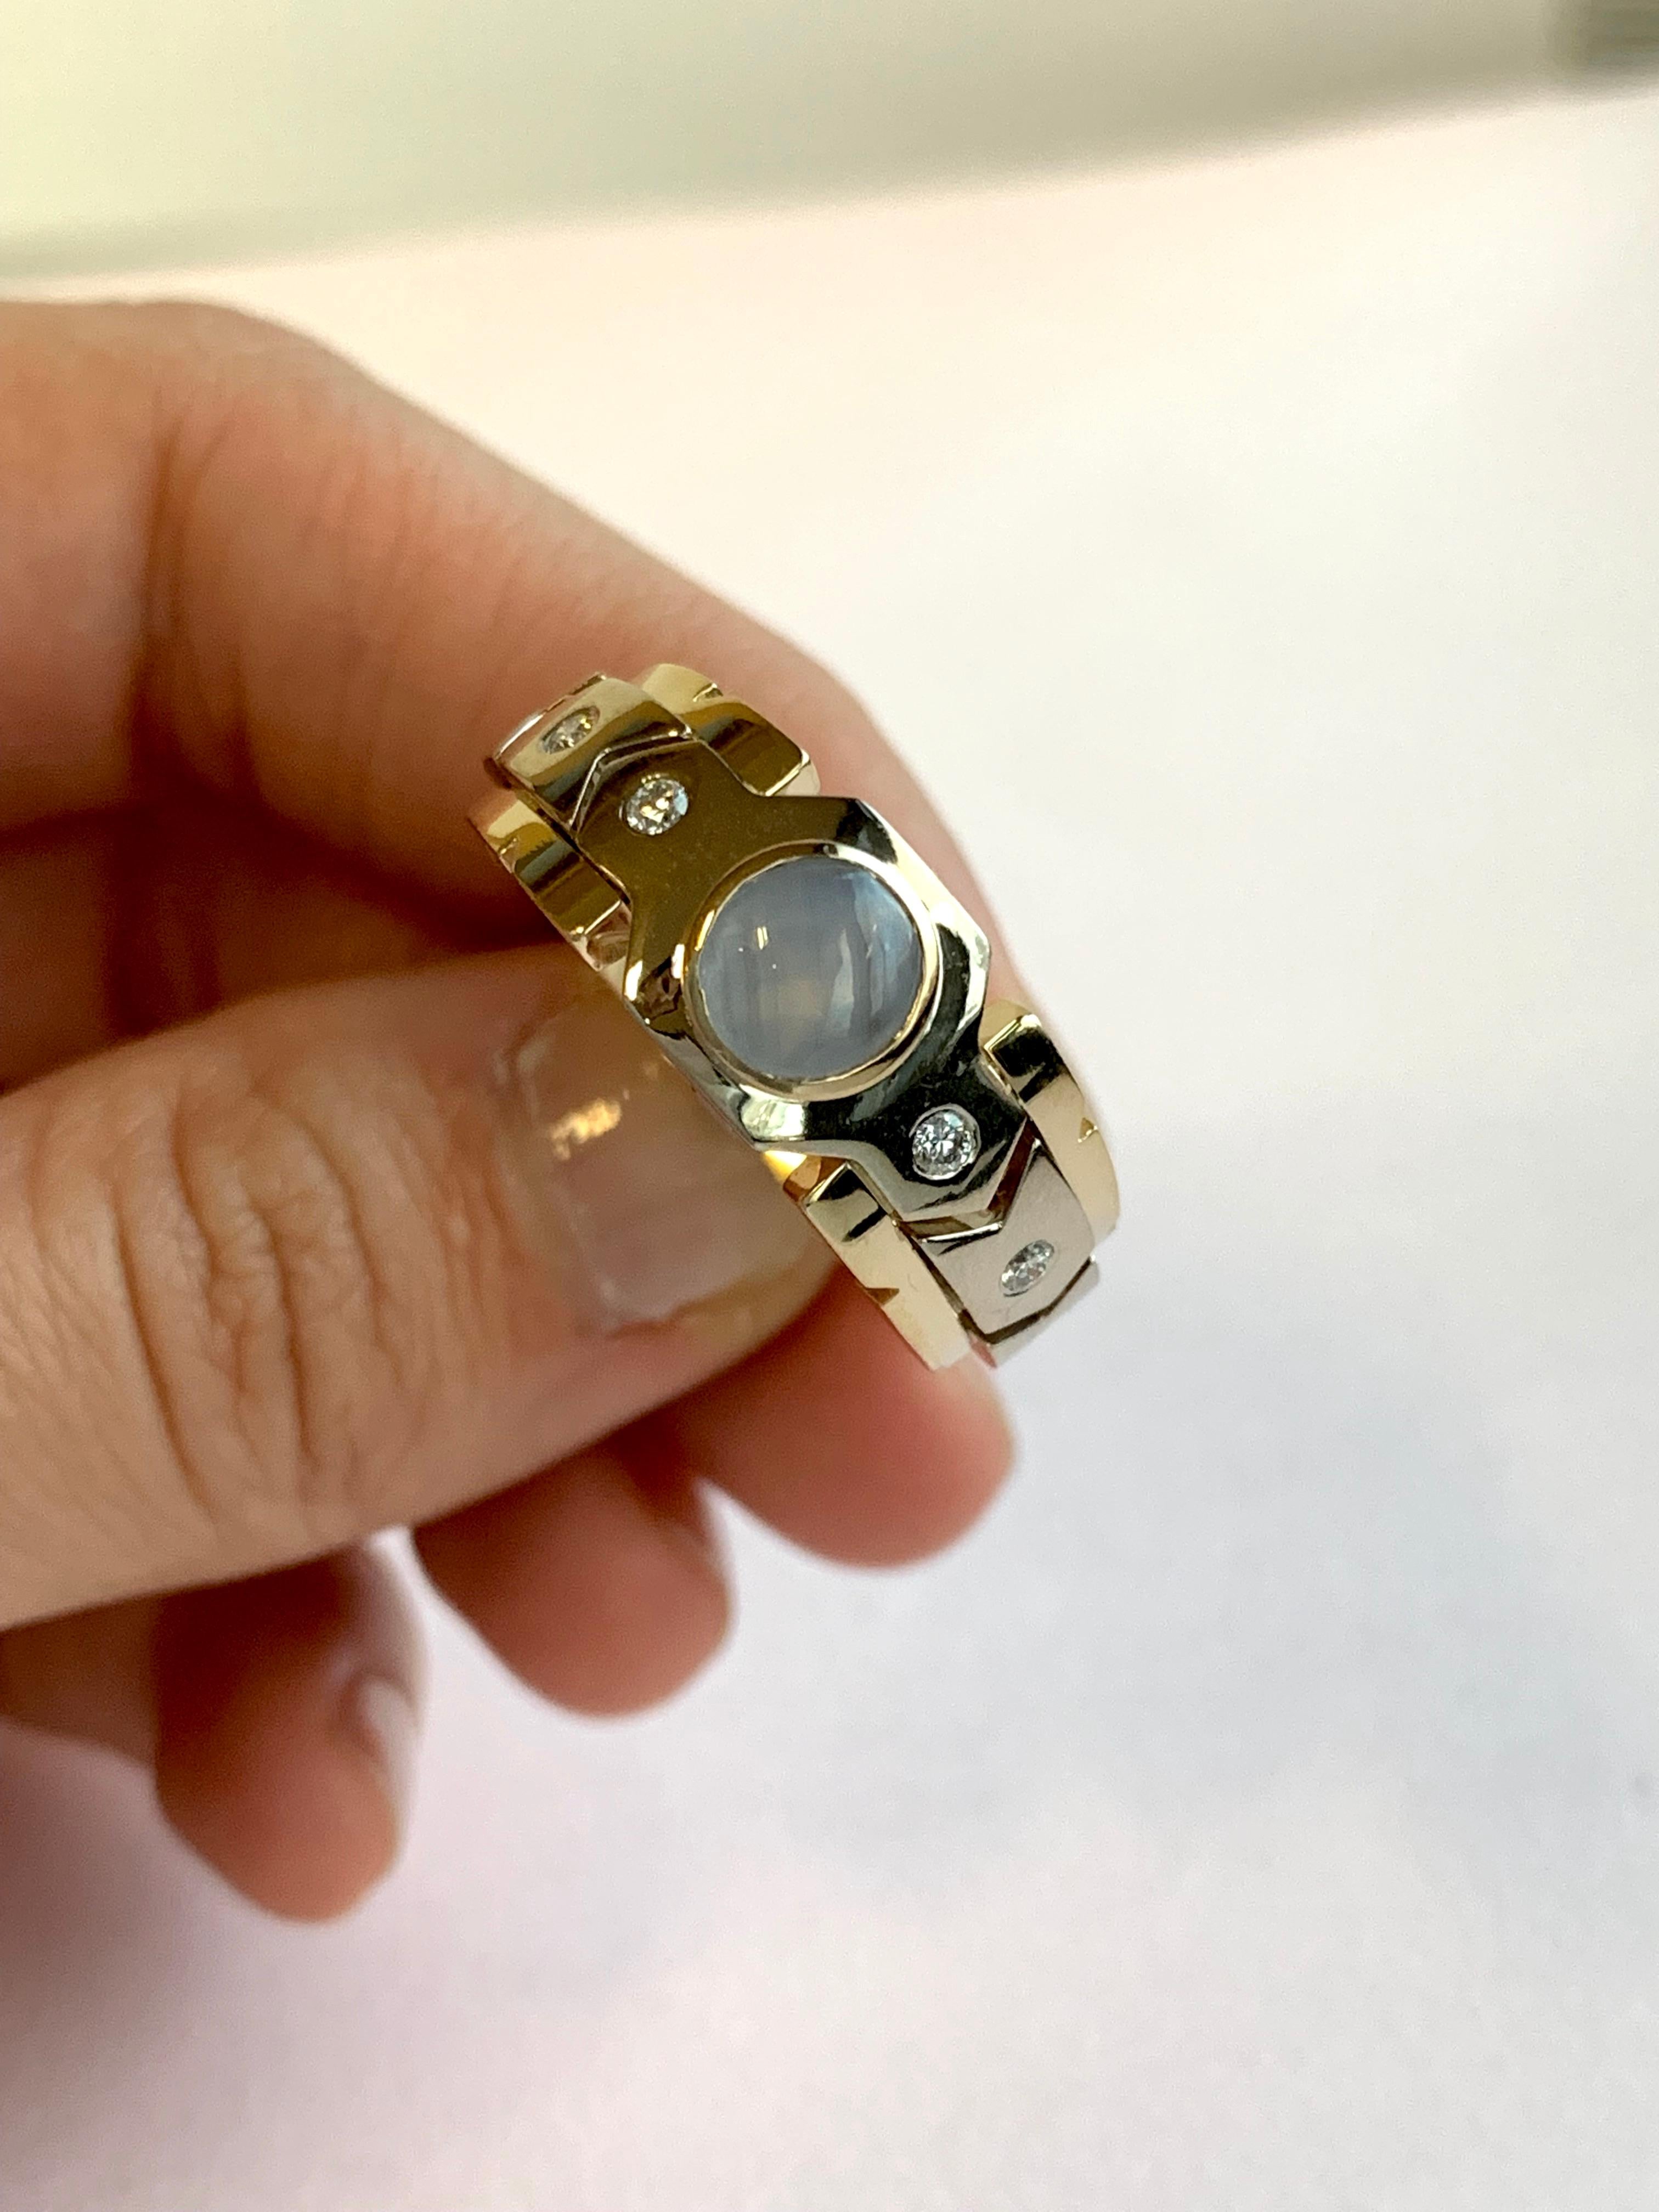 Material: 14k Two Toned Gold
Gemstones: 1 Round Star Sapphire at 1.10 Carats Measuring 6 mm
Diamonds: 4 Brilliant Round White Diamonds at 0.13 Carats. SI Clarity / H-I Color. 
Ring Size: 9.5. Alberto offers complimentary sizing on all rings.

Fine